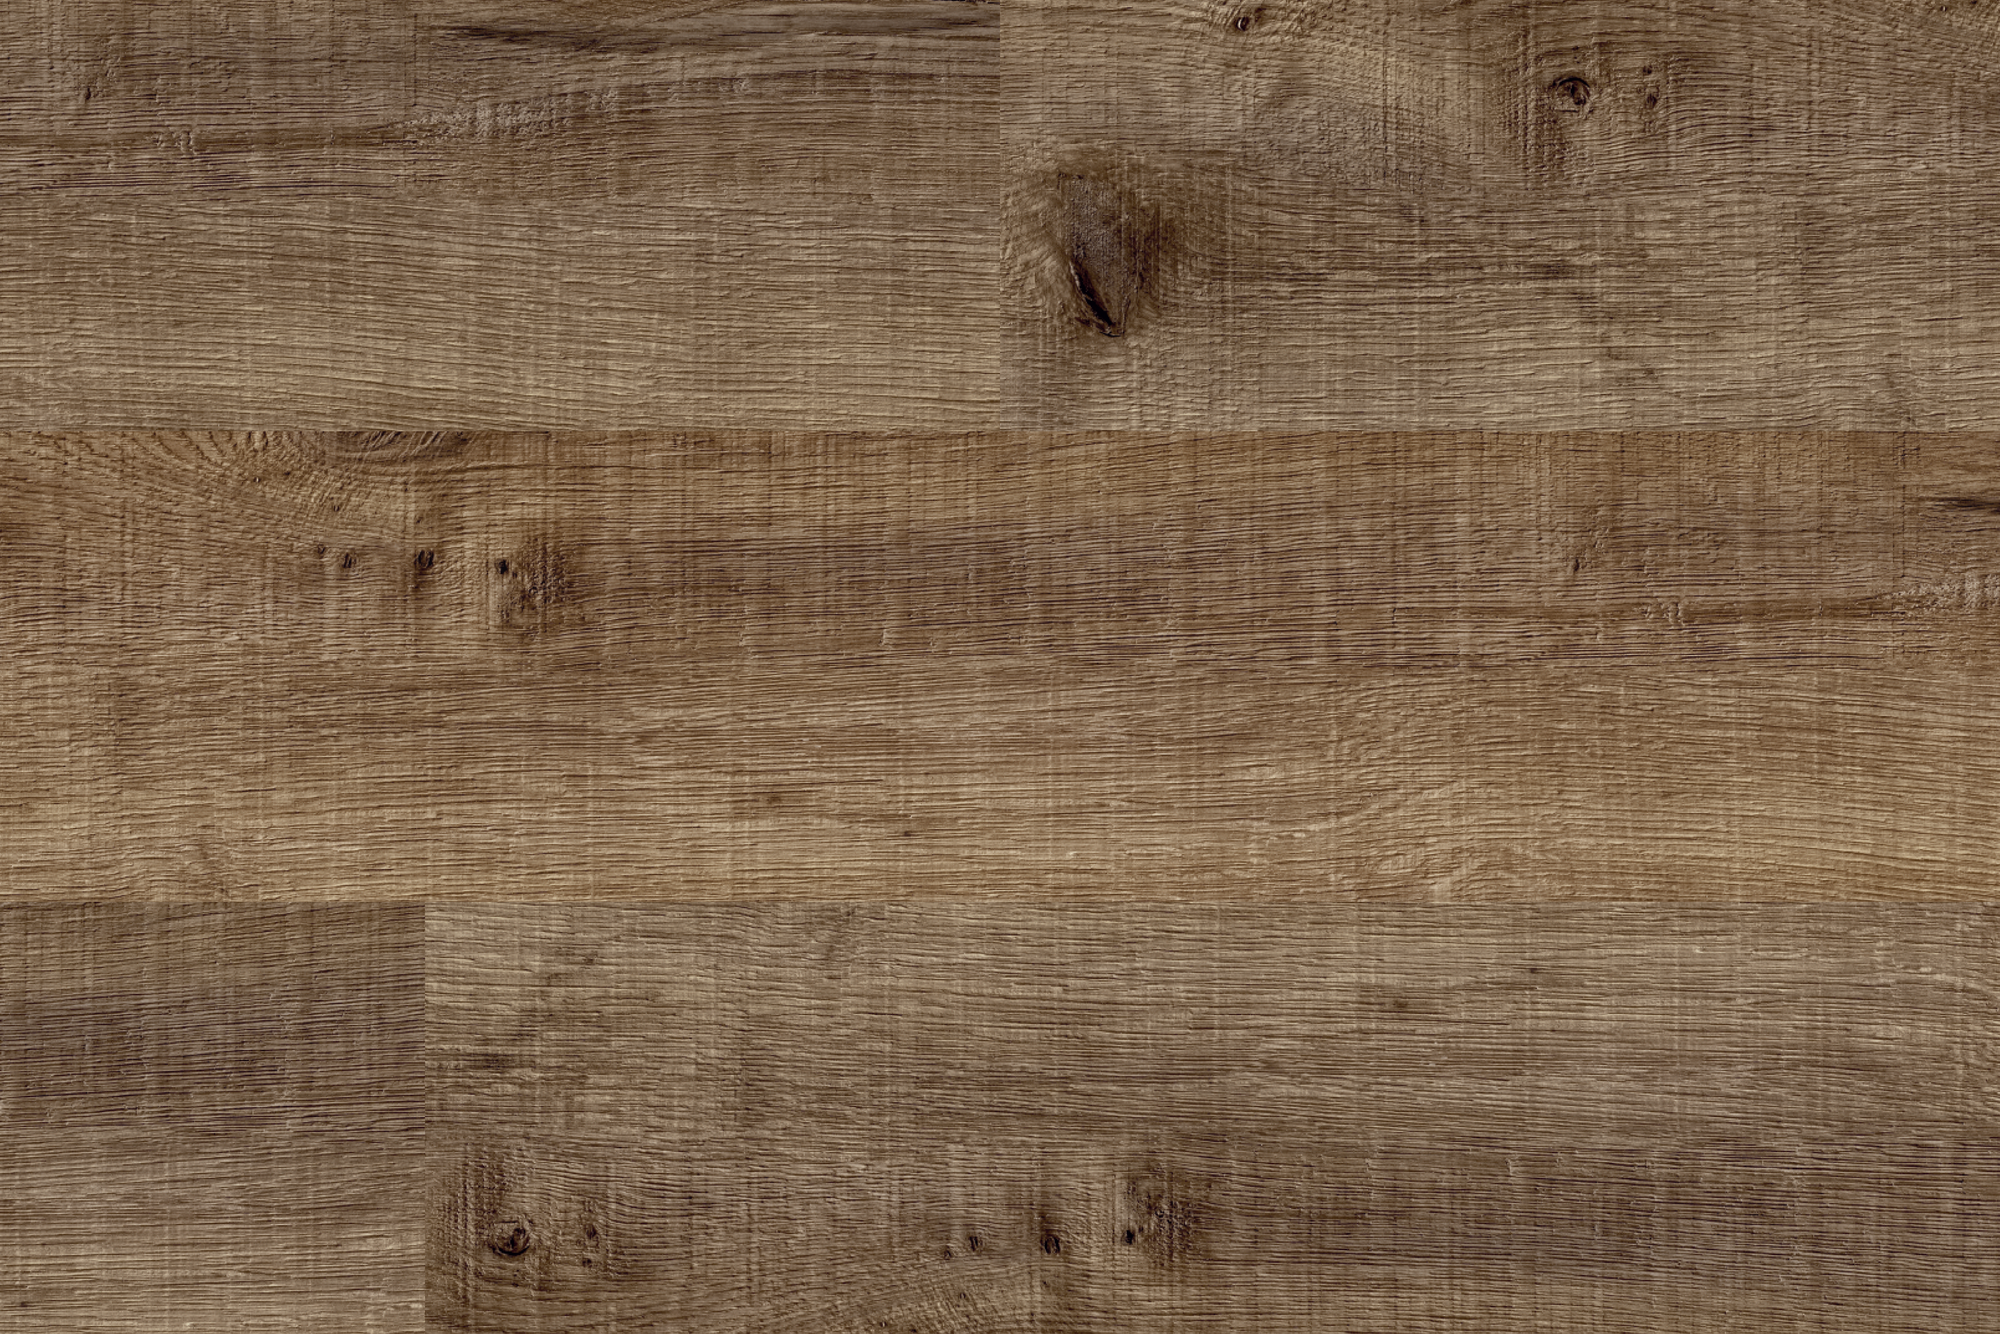  Cartmel Sawn engineered hardwood floor from our free sample collection